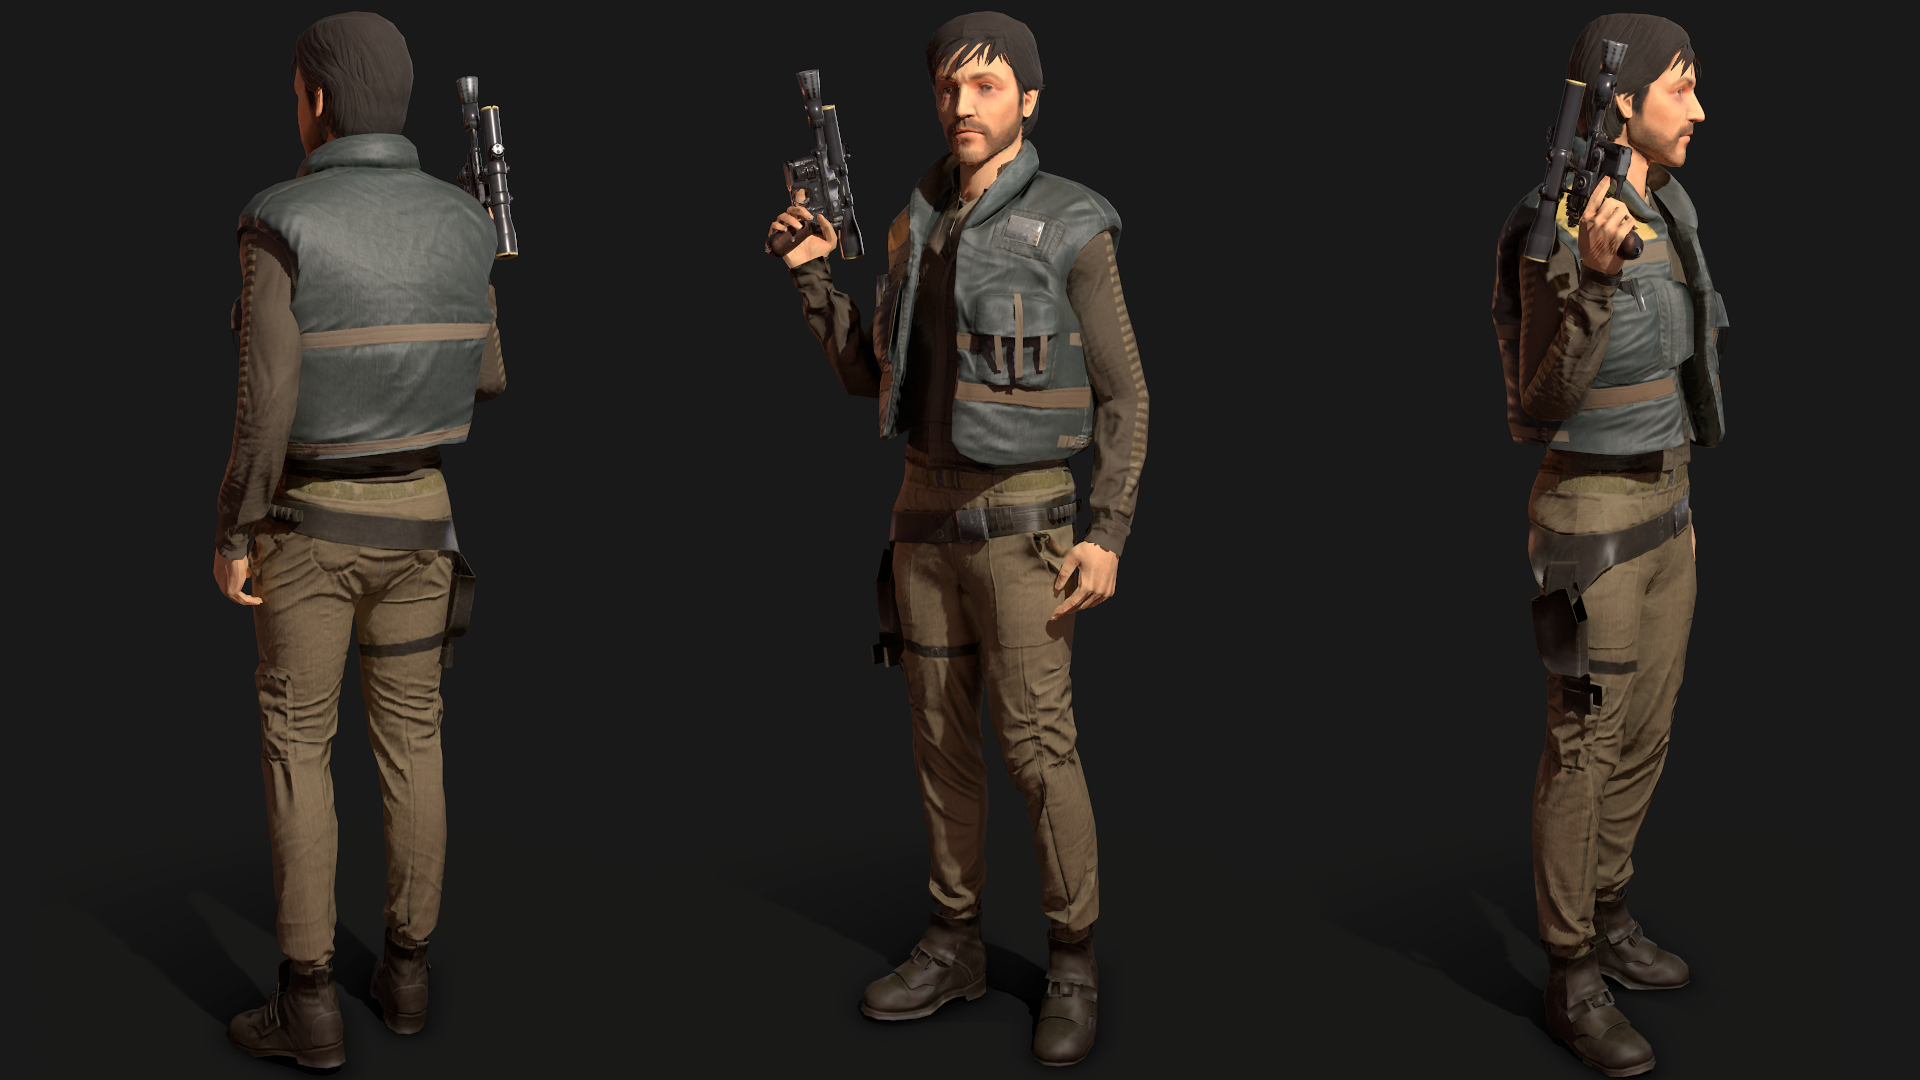 More information about "Cassian Andor"